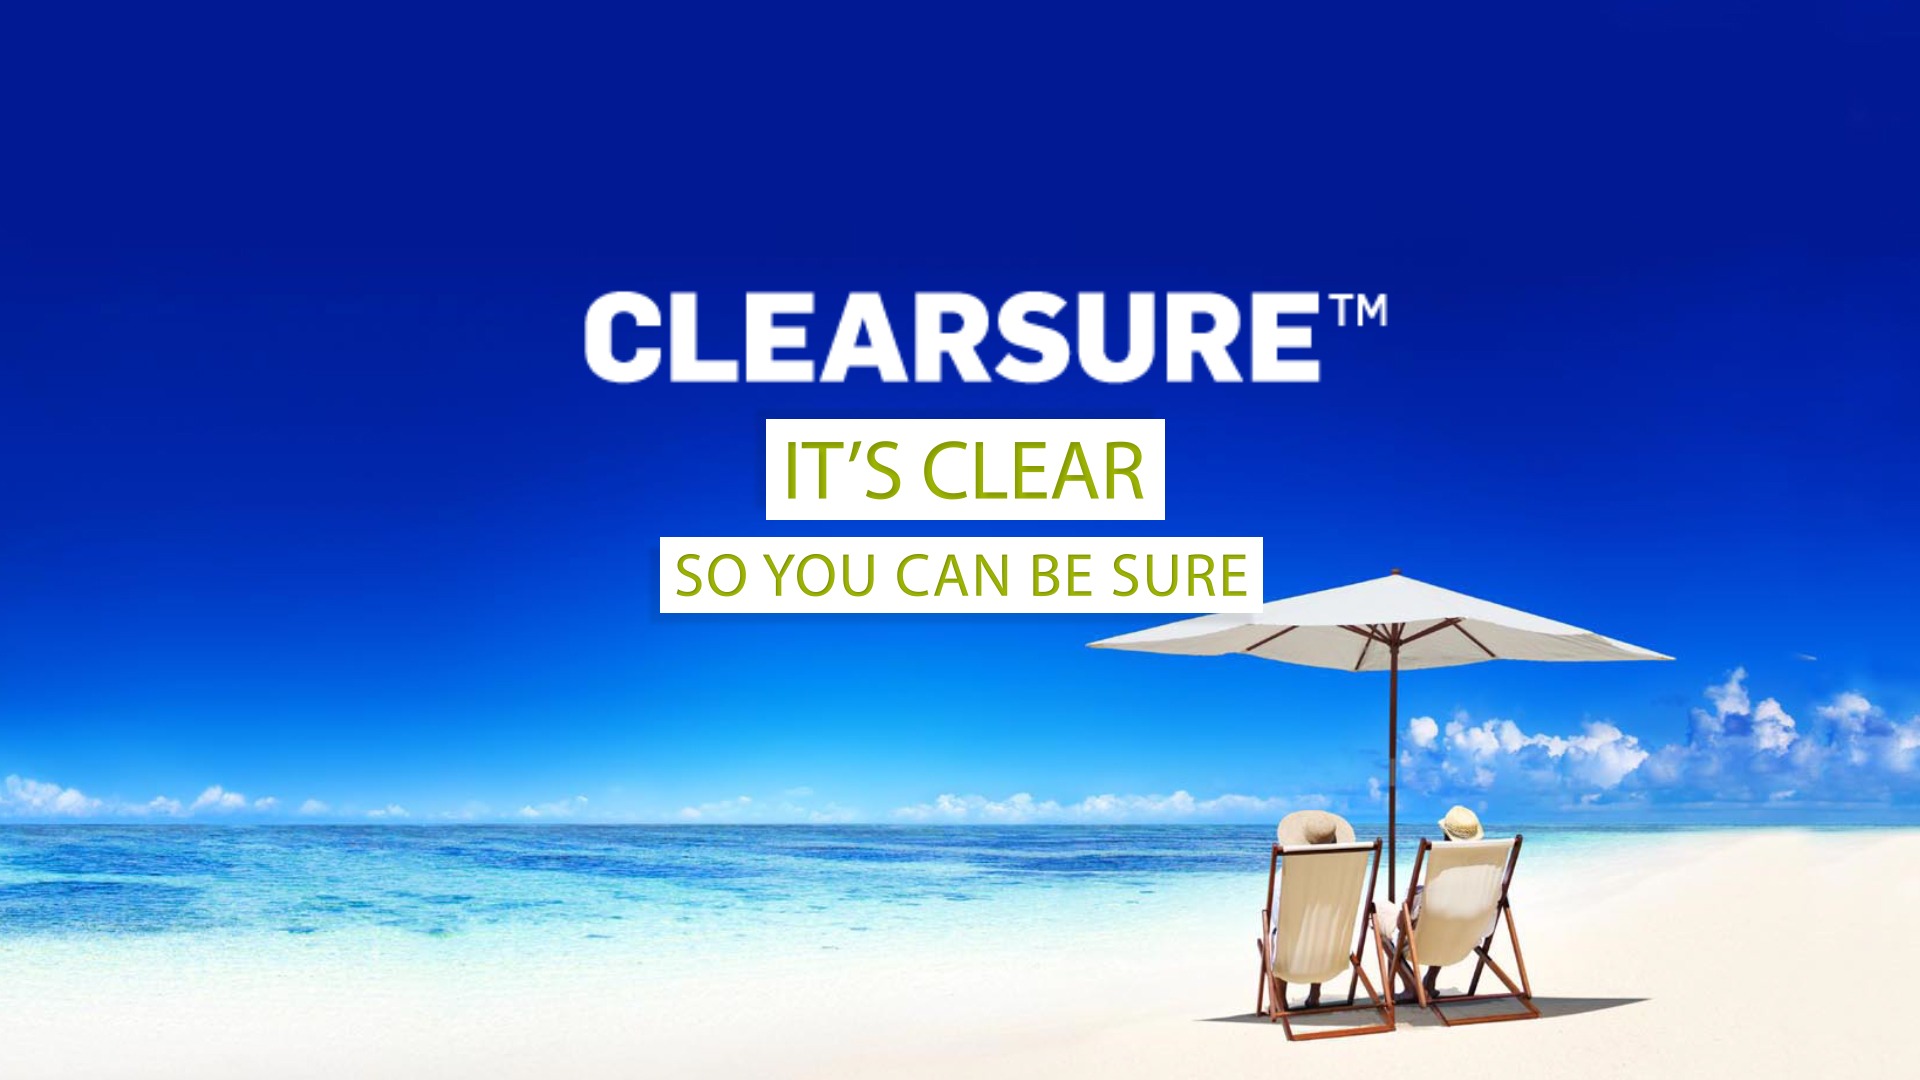 Clearsure travel insurance 10sec TV Commercial